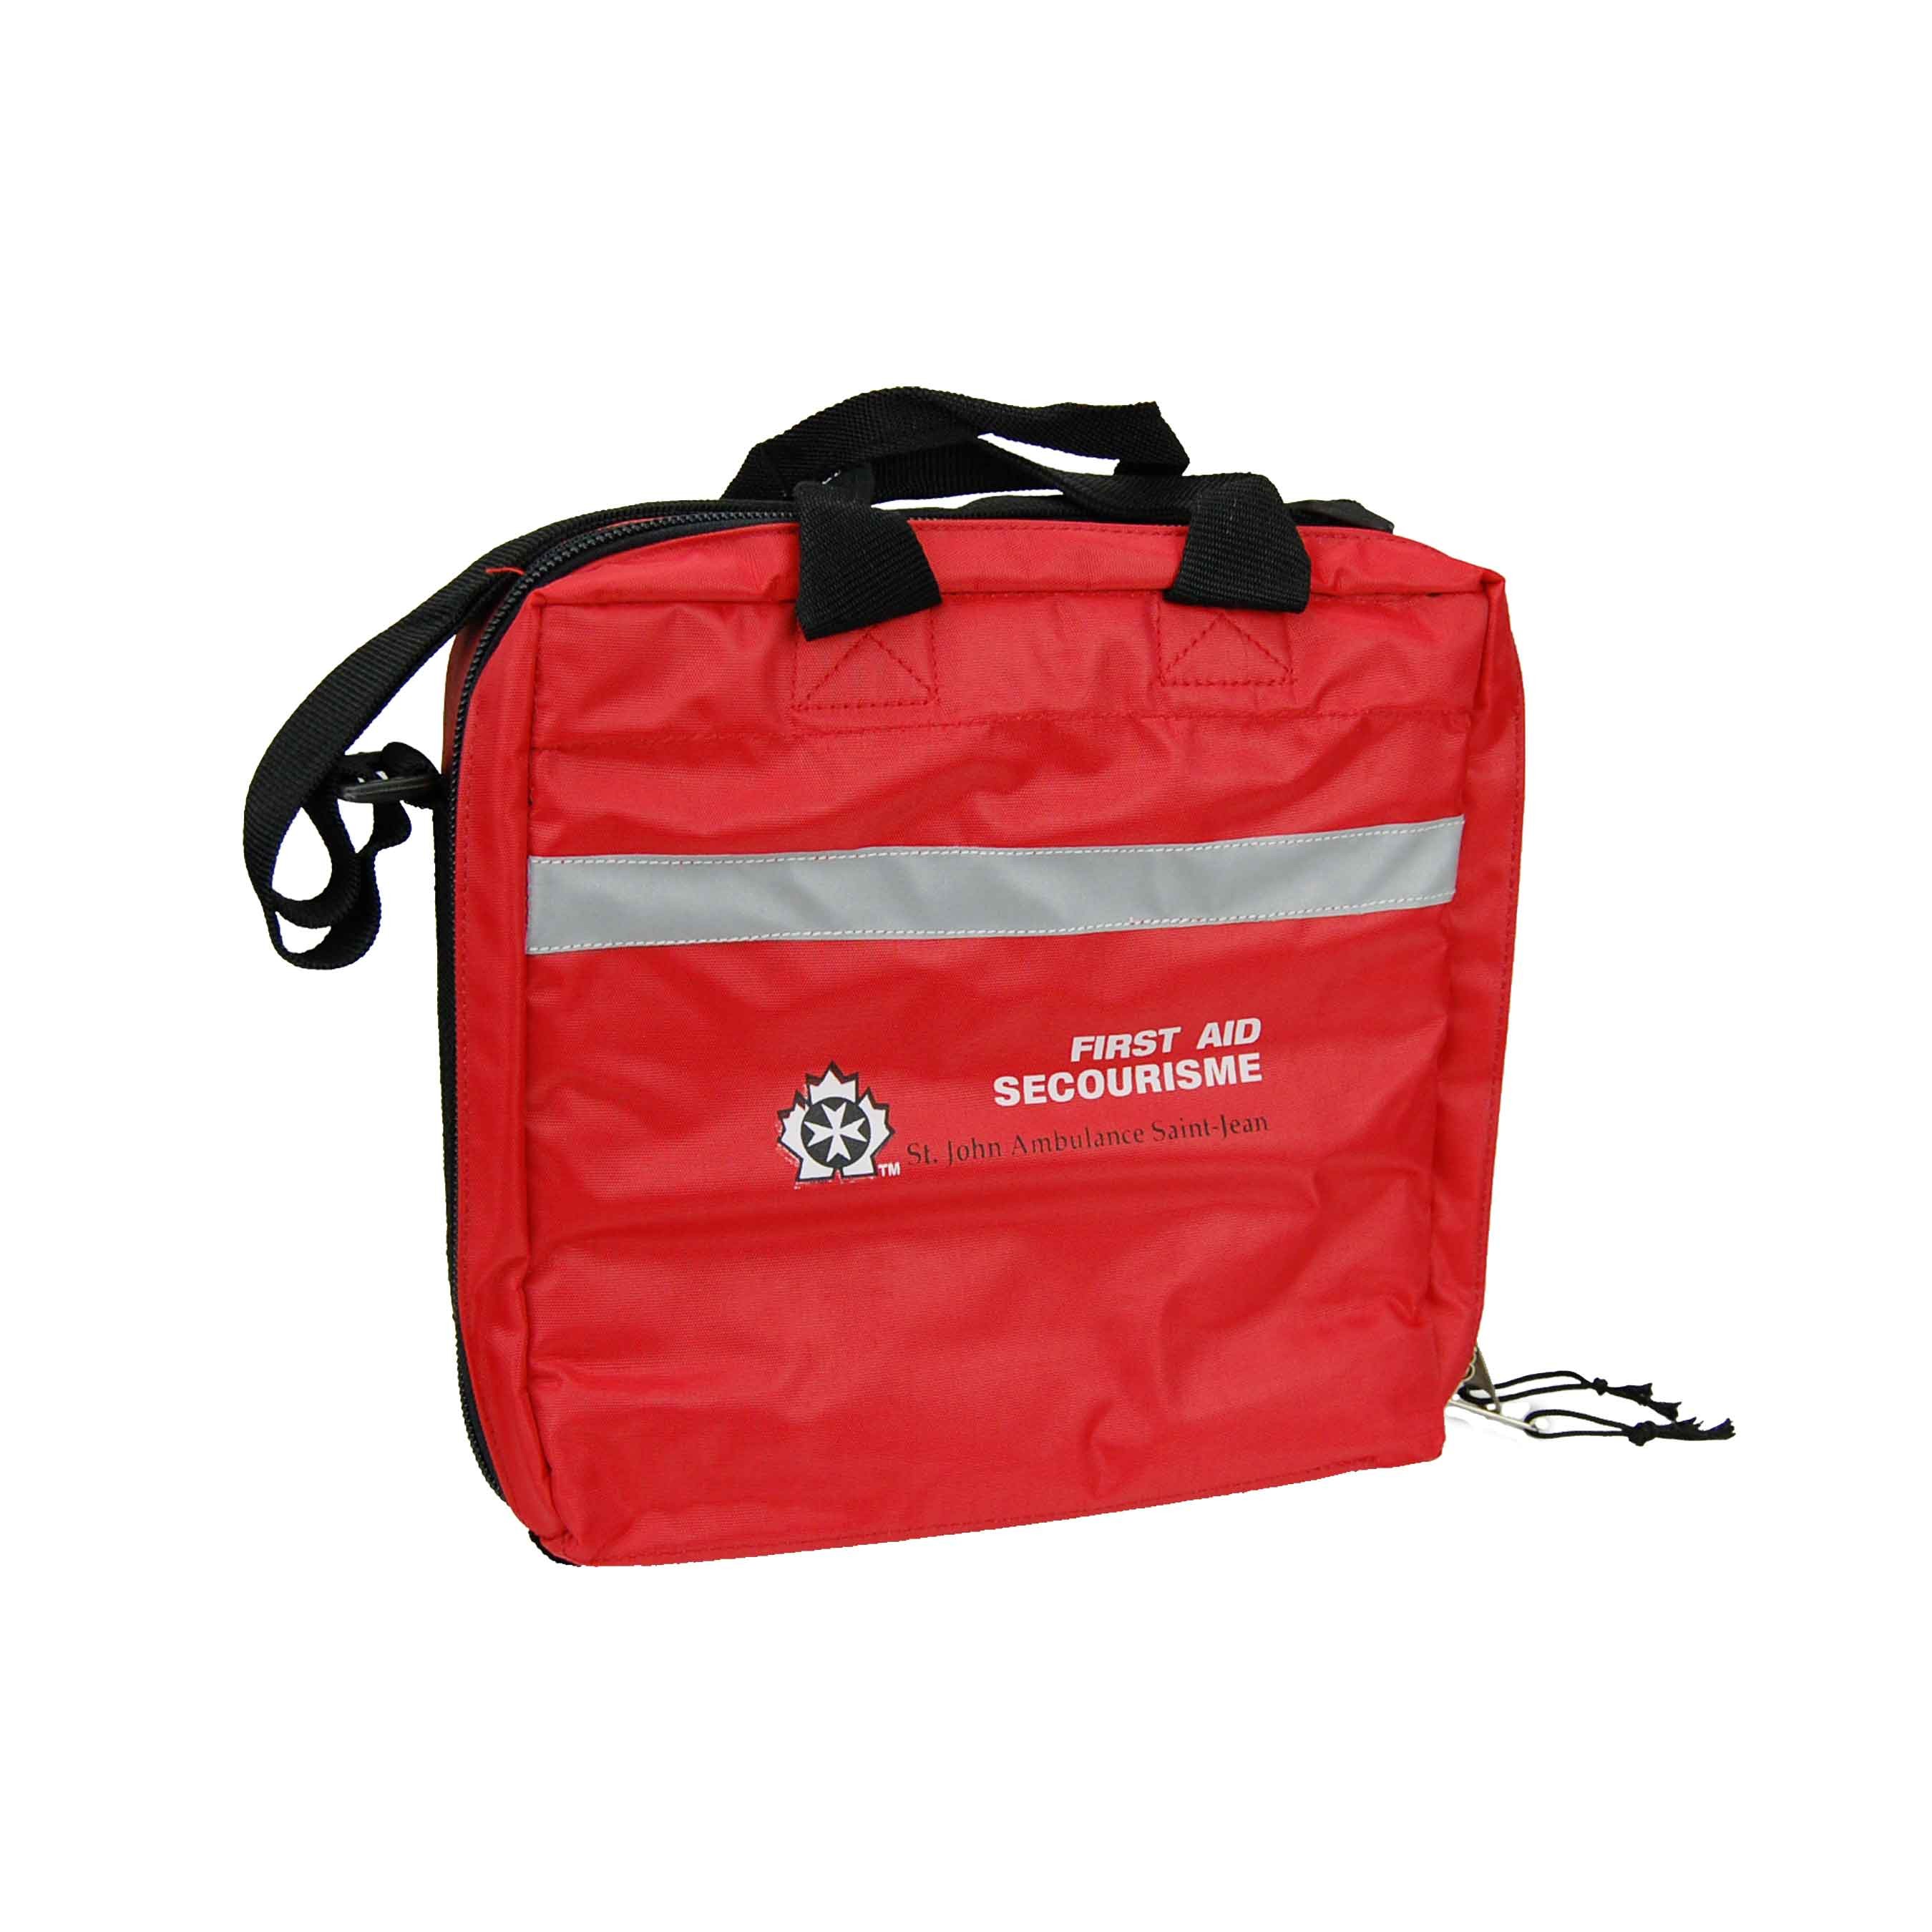 St. John Ambulance First Aid Carrying Case - Bag for CA$65.00 Online in ...